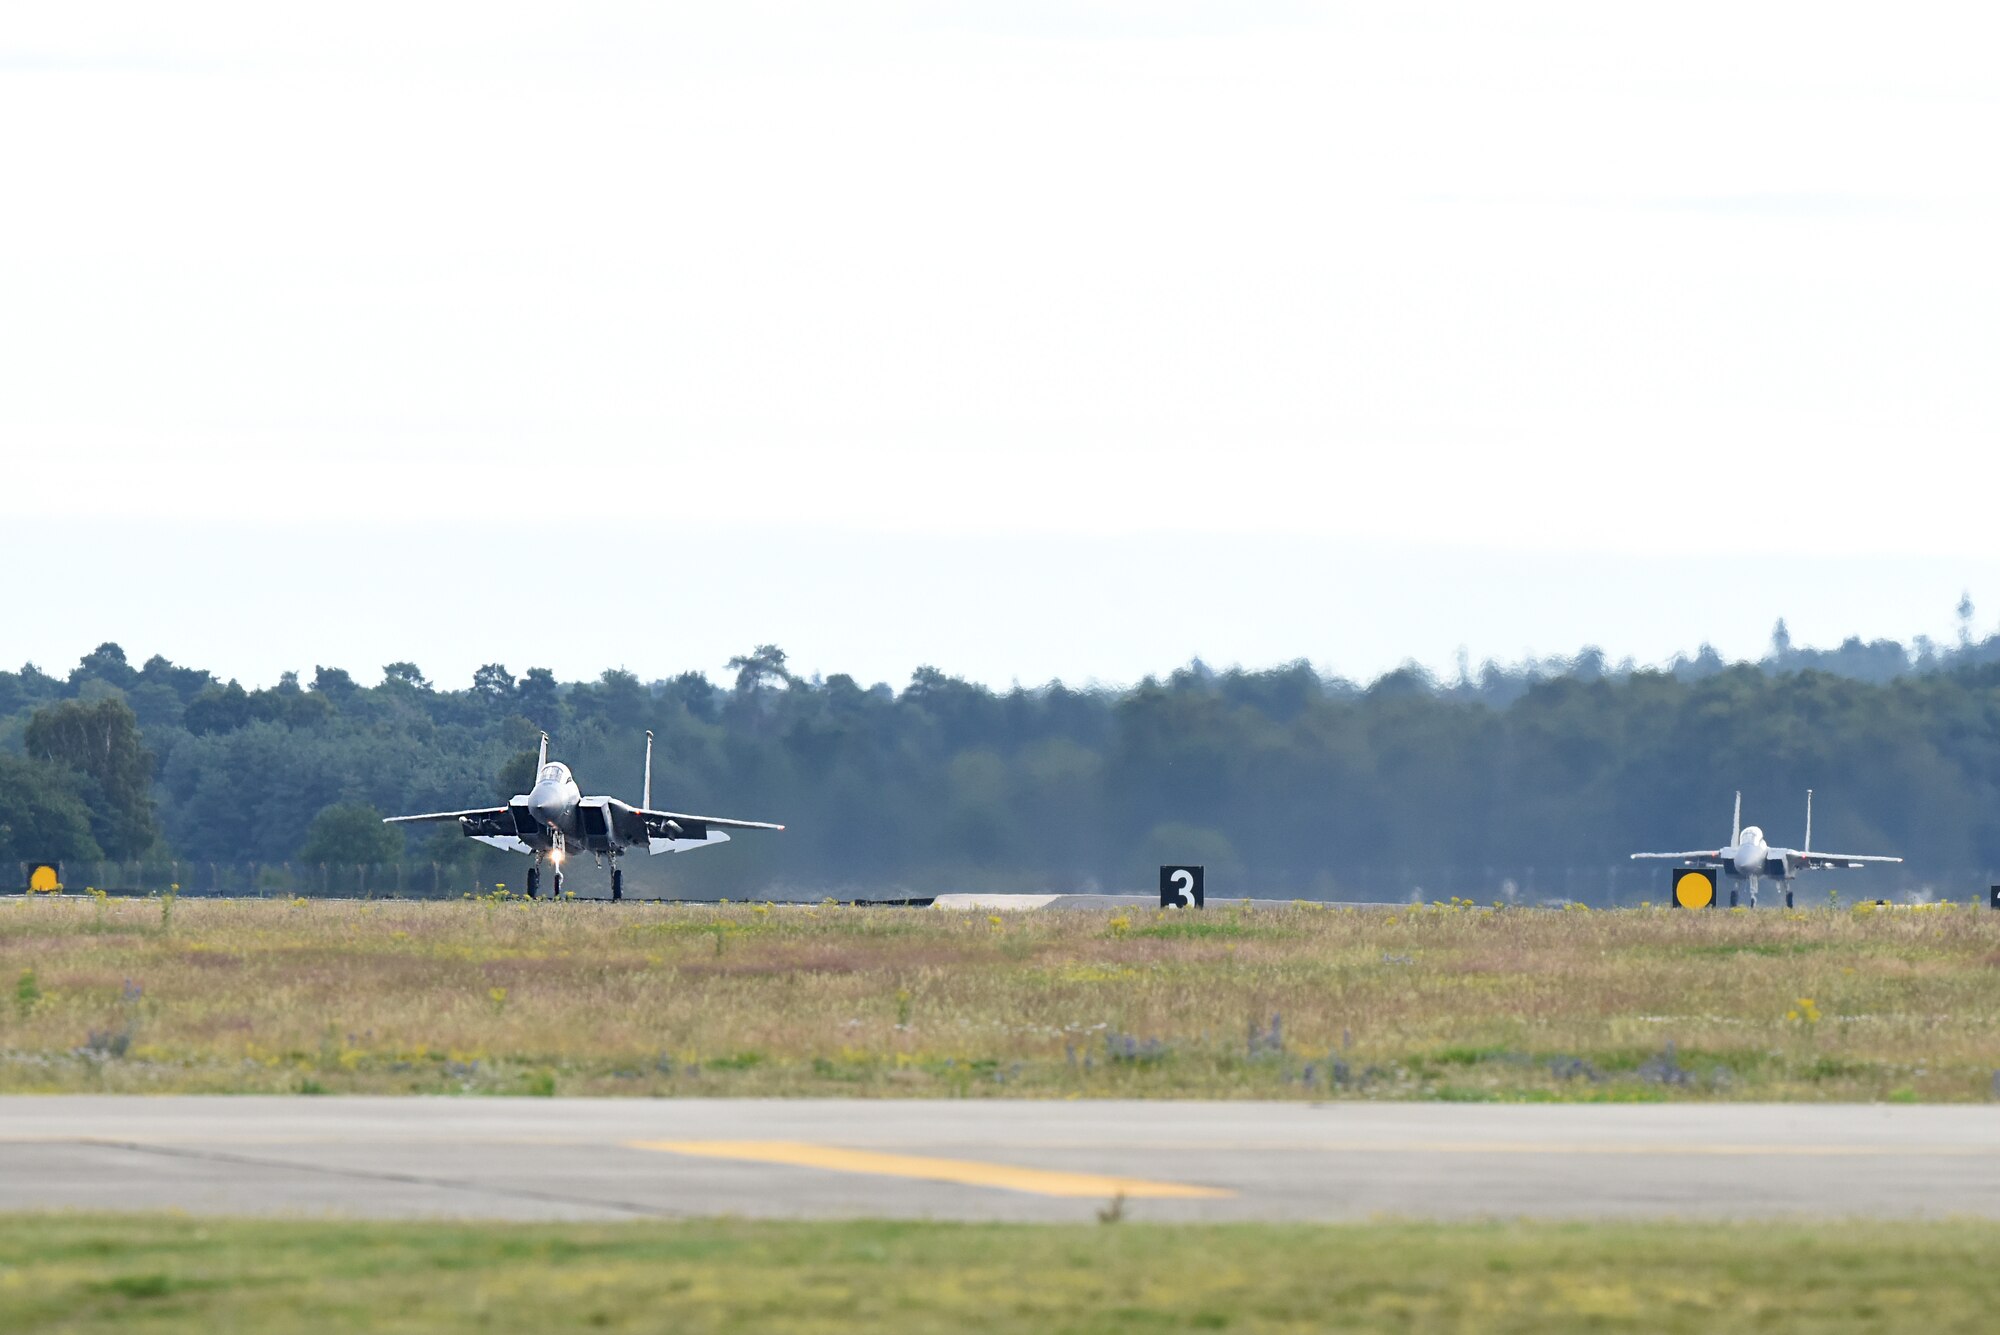 An F-15C Eagles assigned to the 493rd Fighter Squadron take off at Royal Air Force Lakenheath, England, July 23, 2020. The F-15C is an all-weather, extremely maneuverable, tactical fighter designed to permit the U.S. Air Force to gain and maintain air supremacy over the battlefield. (U.S. Air Force photo by Airman 1st Class Rhonda Smith)